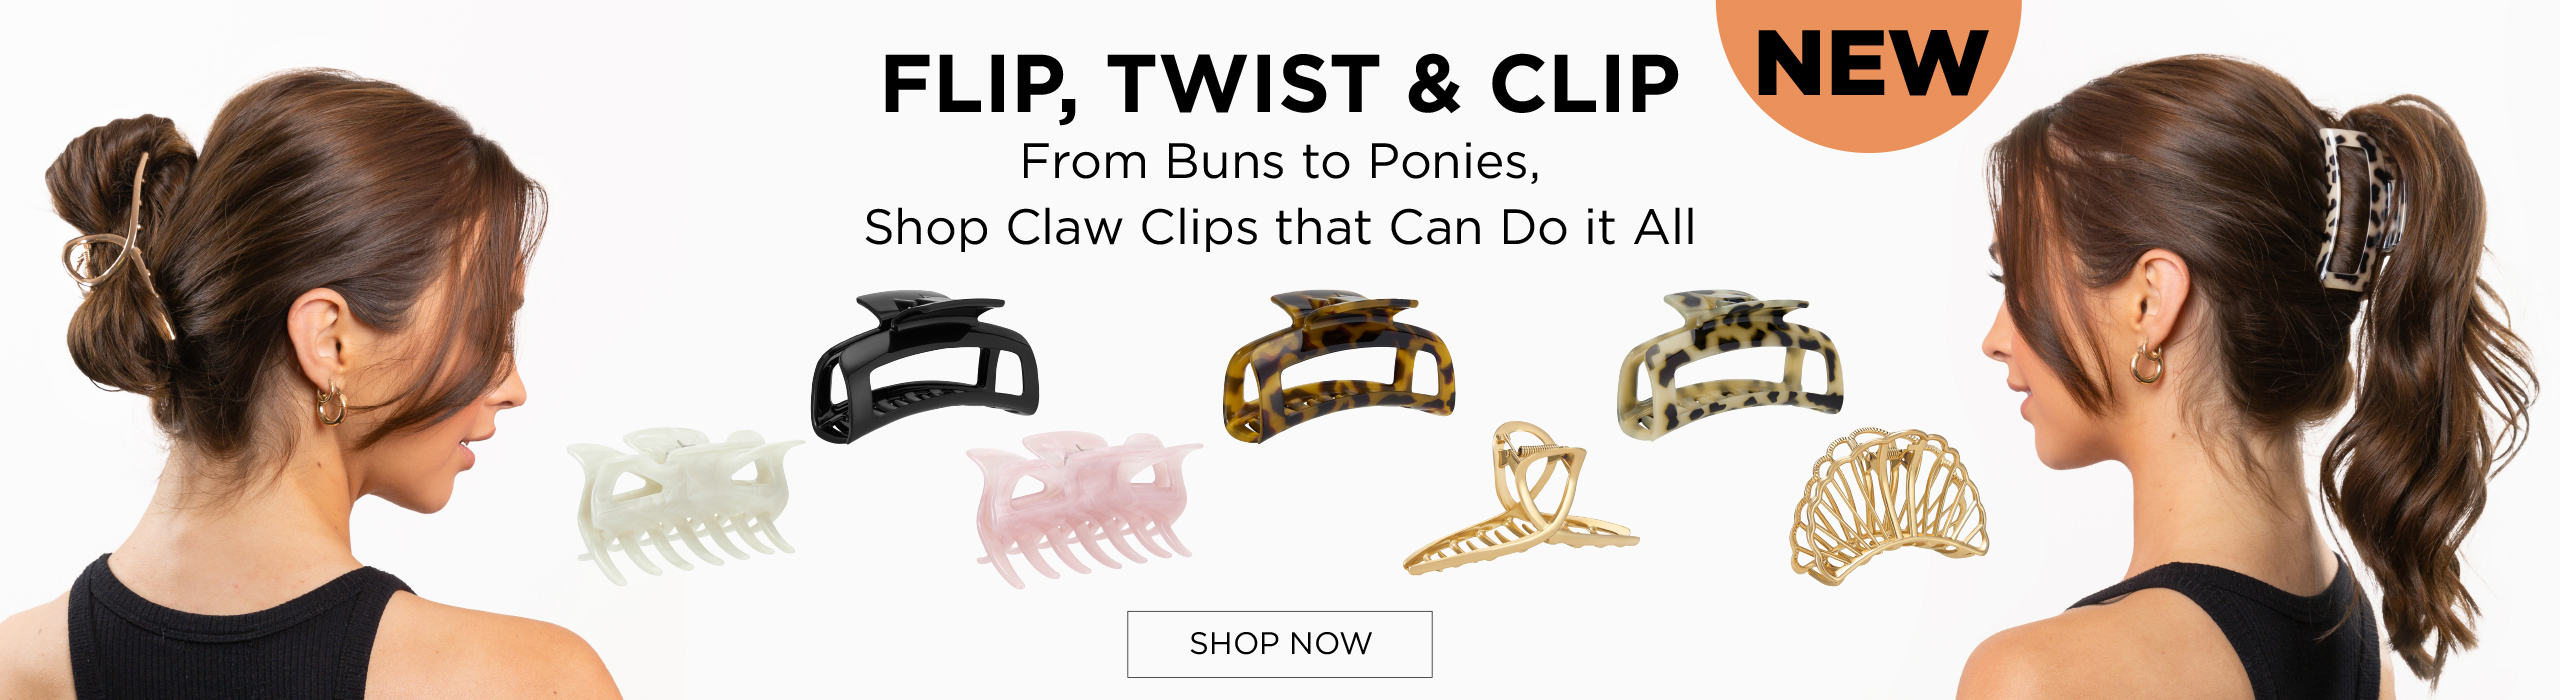 Claw Grips for Everyday Occassions